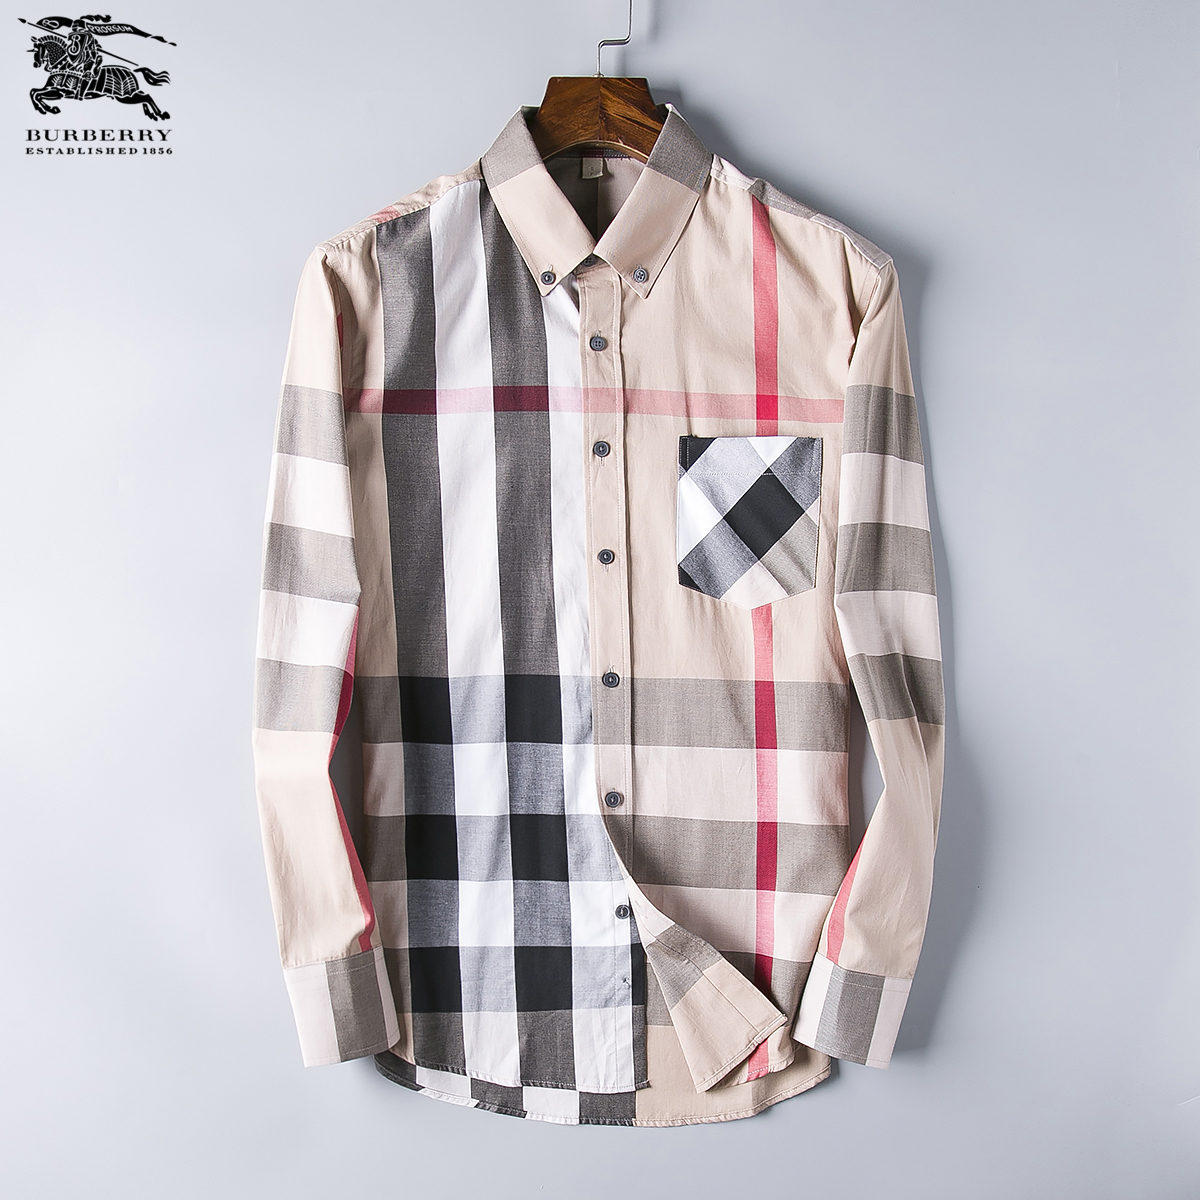 Cheap 2018 New Cheap Burberry Long Sleeved Shirts For Men in 195180,$28 ...